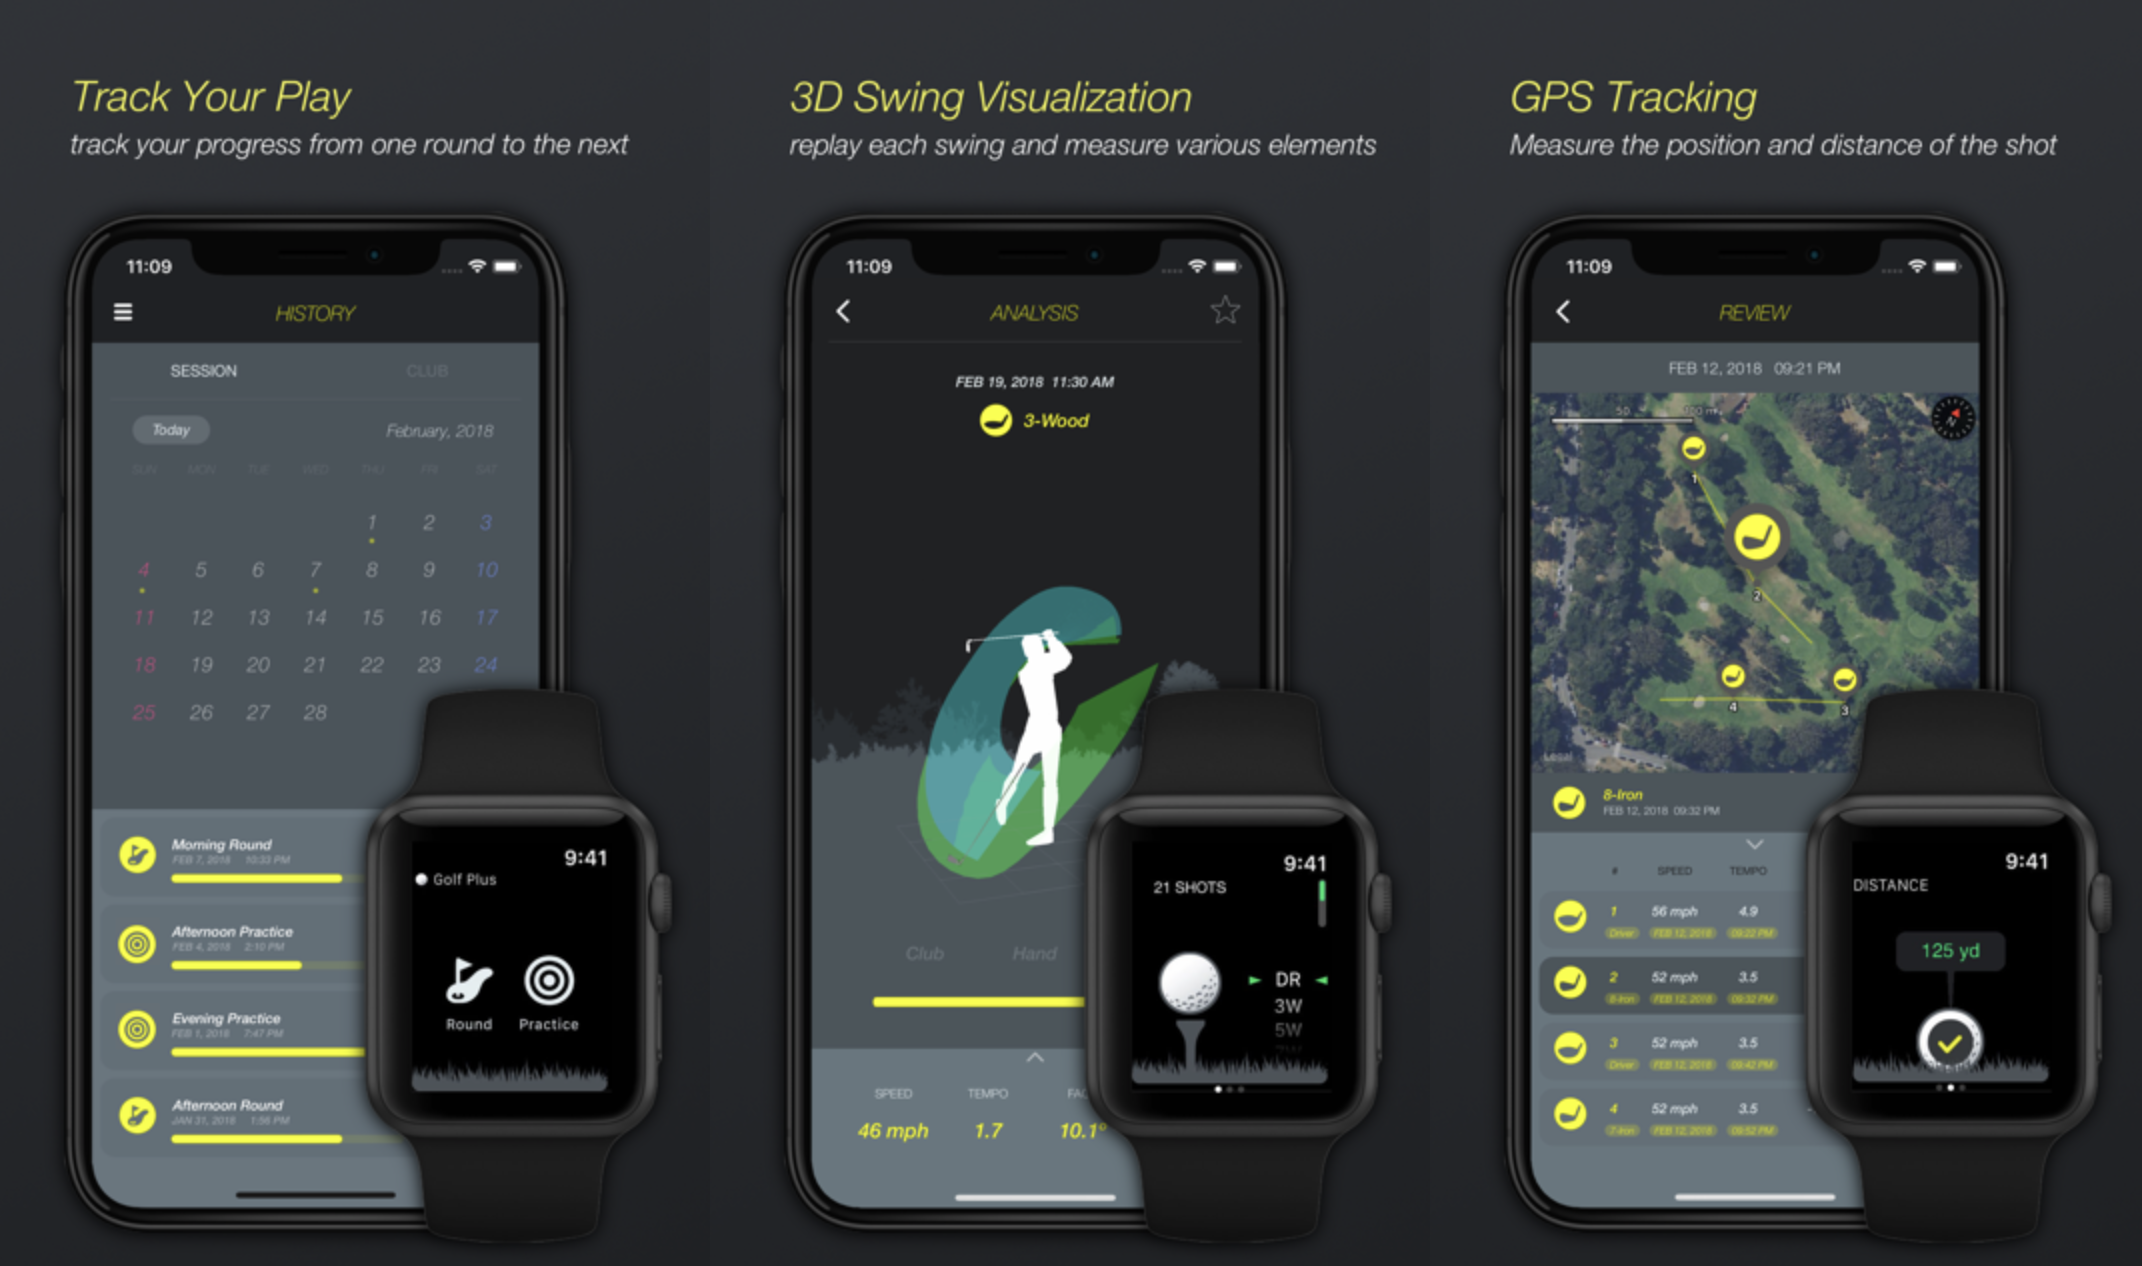 Golf Plus Apple Watch app aims to 